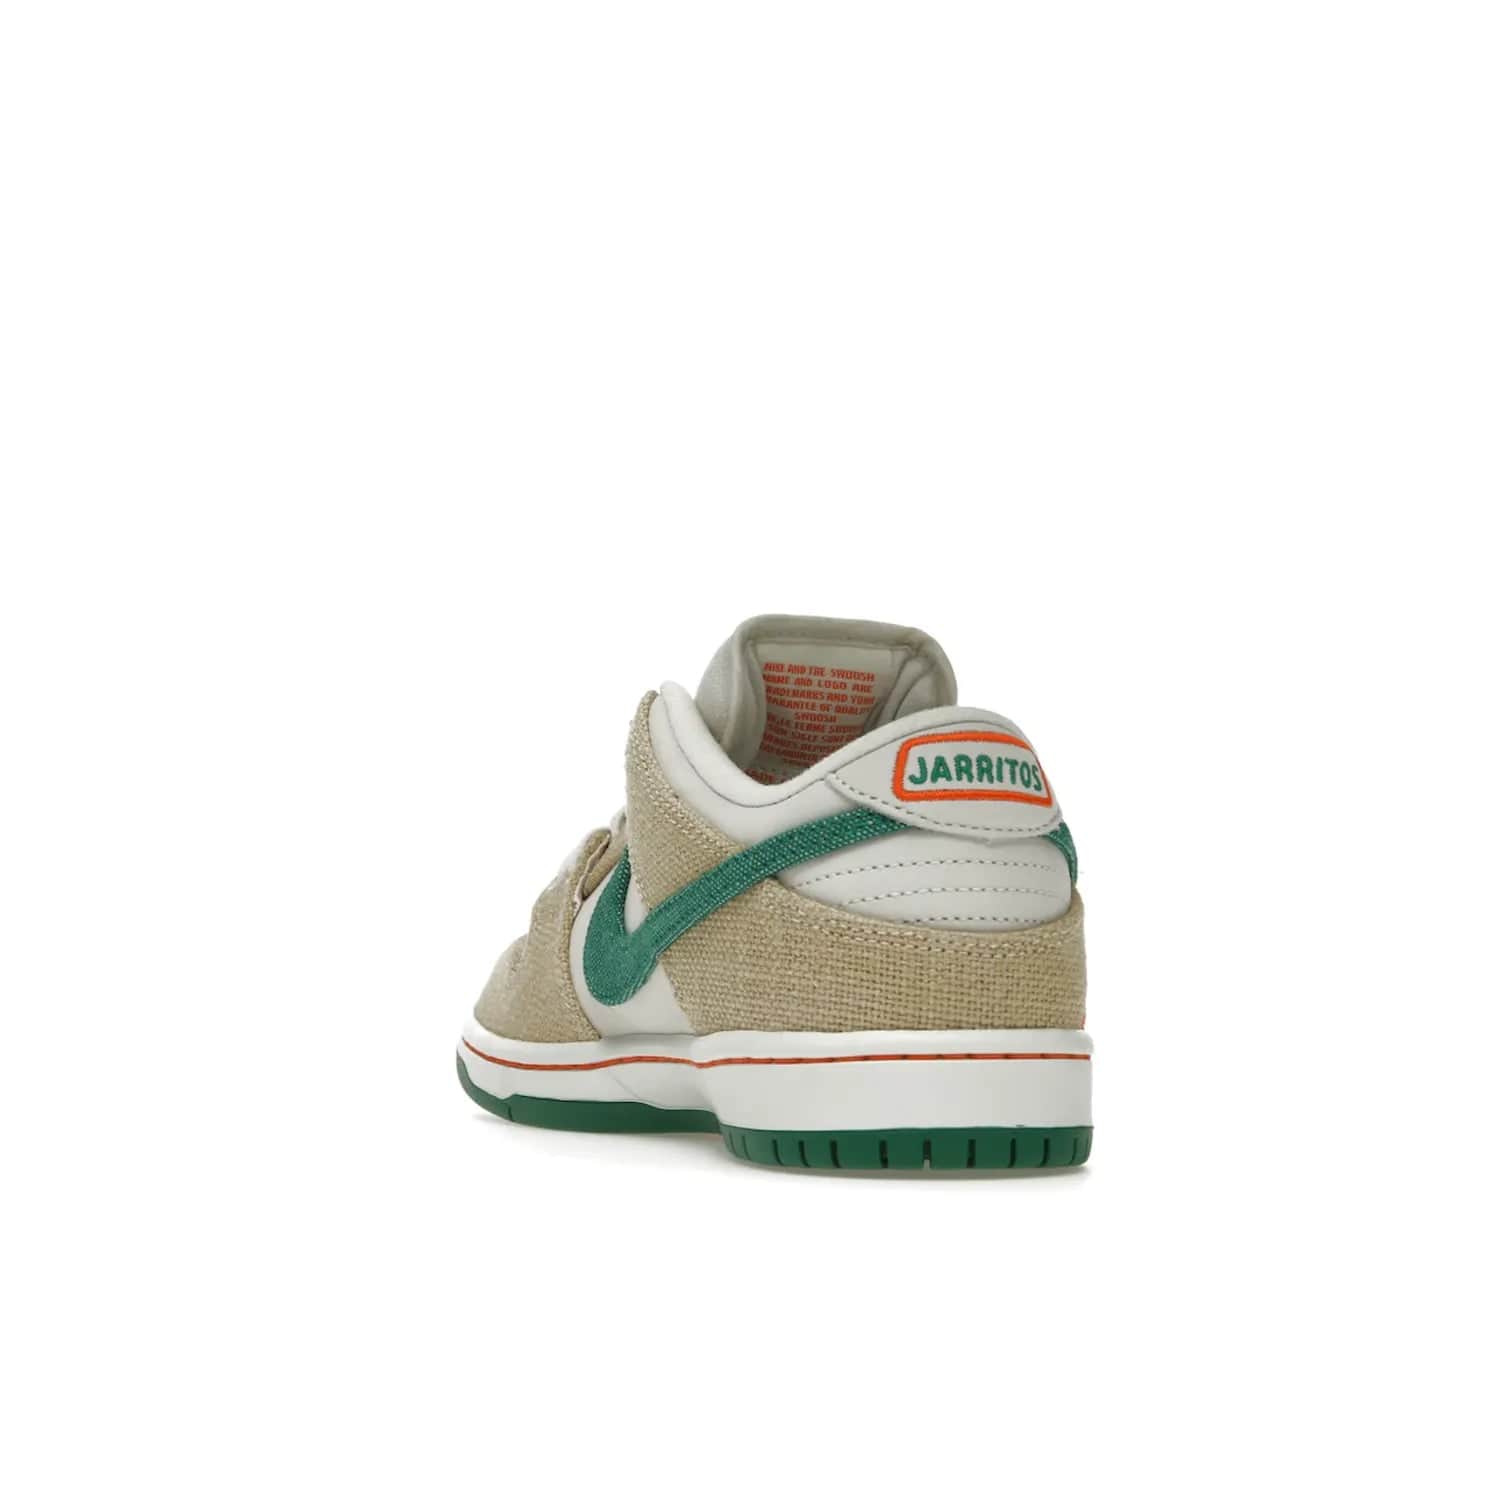 Nike SB Dunk Low Jarritos - Image 26 - Only at www.BallersClubKickz.com - Shop limited edition Nike SB Dunk Low Jarritos! Crafted with white leather and tear-away canvas materials with green accents. Includes orange, green, and white laces to customize your look. Available now.